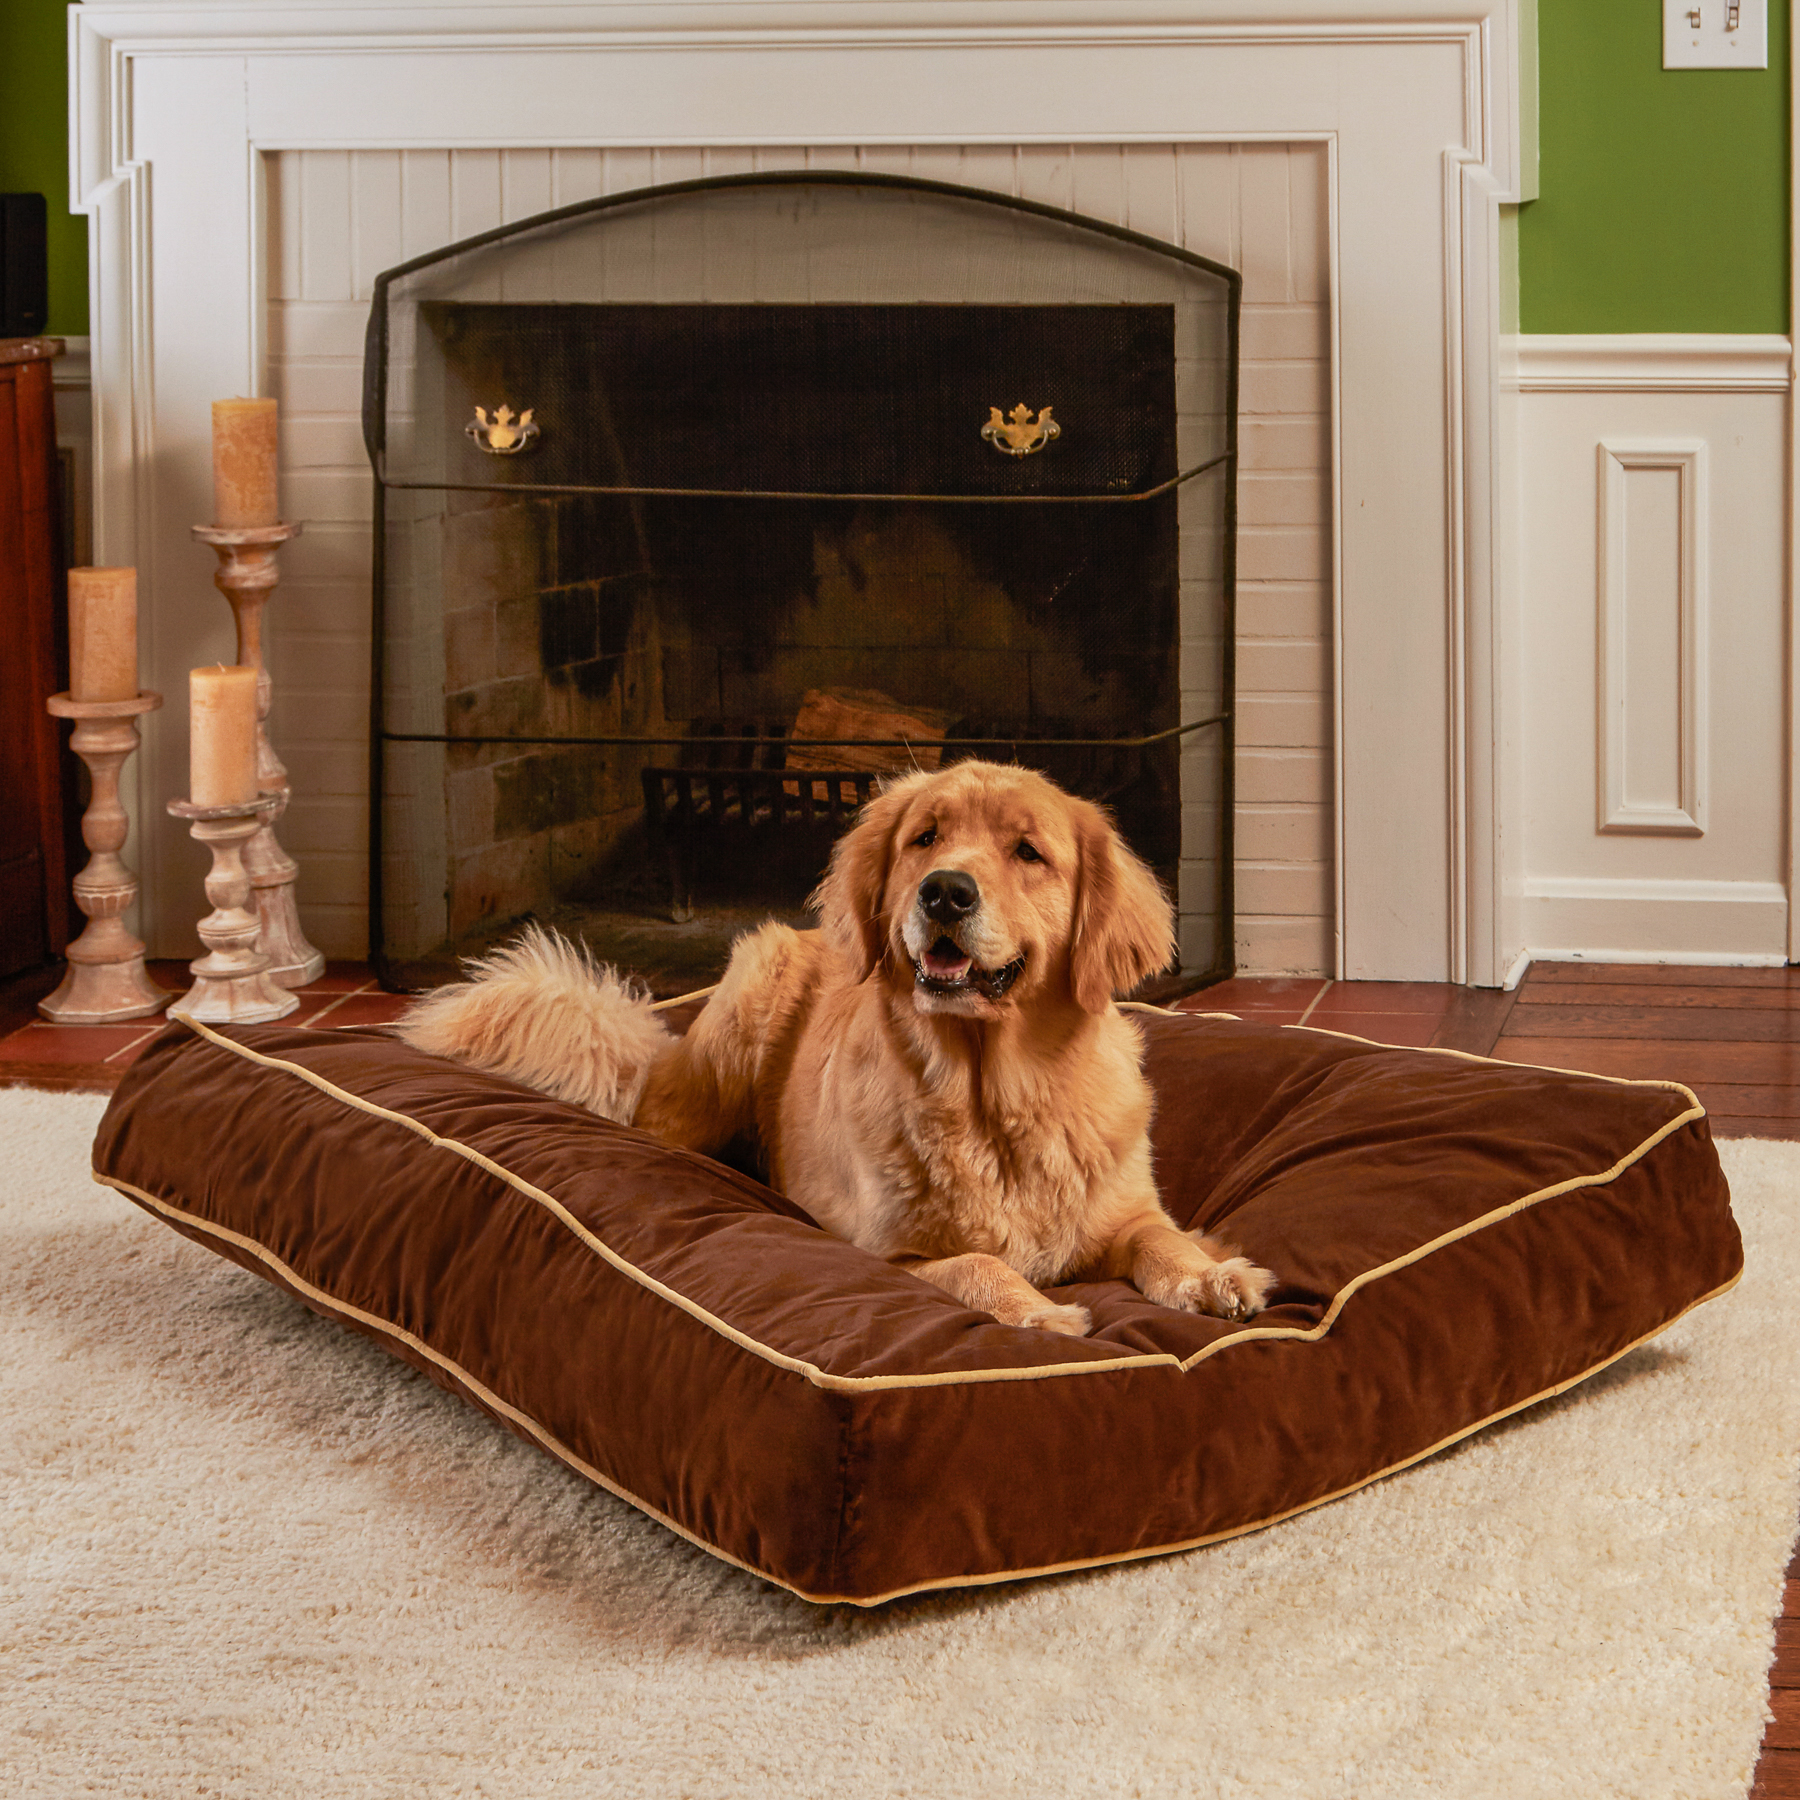 Happy Hounds Buster Rectangle Pillow Style Dog Bed, Cocoa, Large (48 x 36 in.) - image 3 of 8